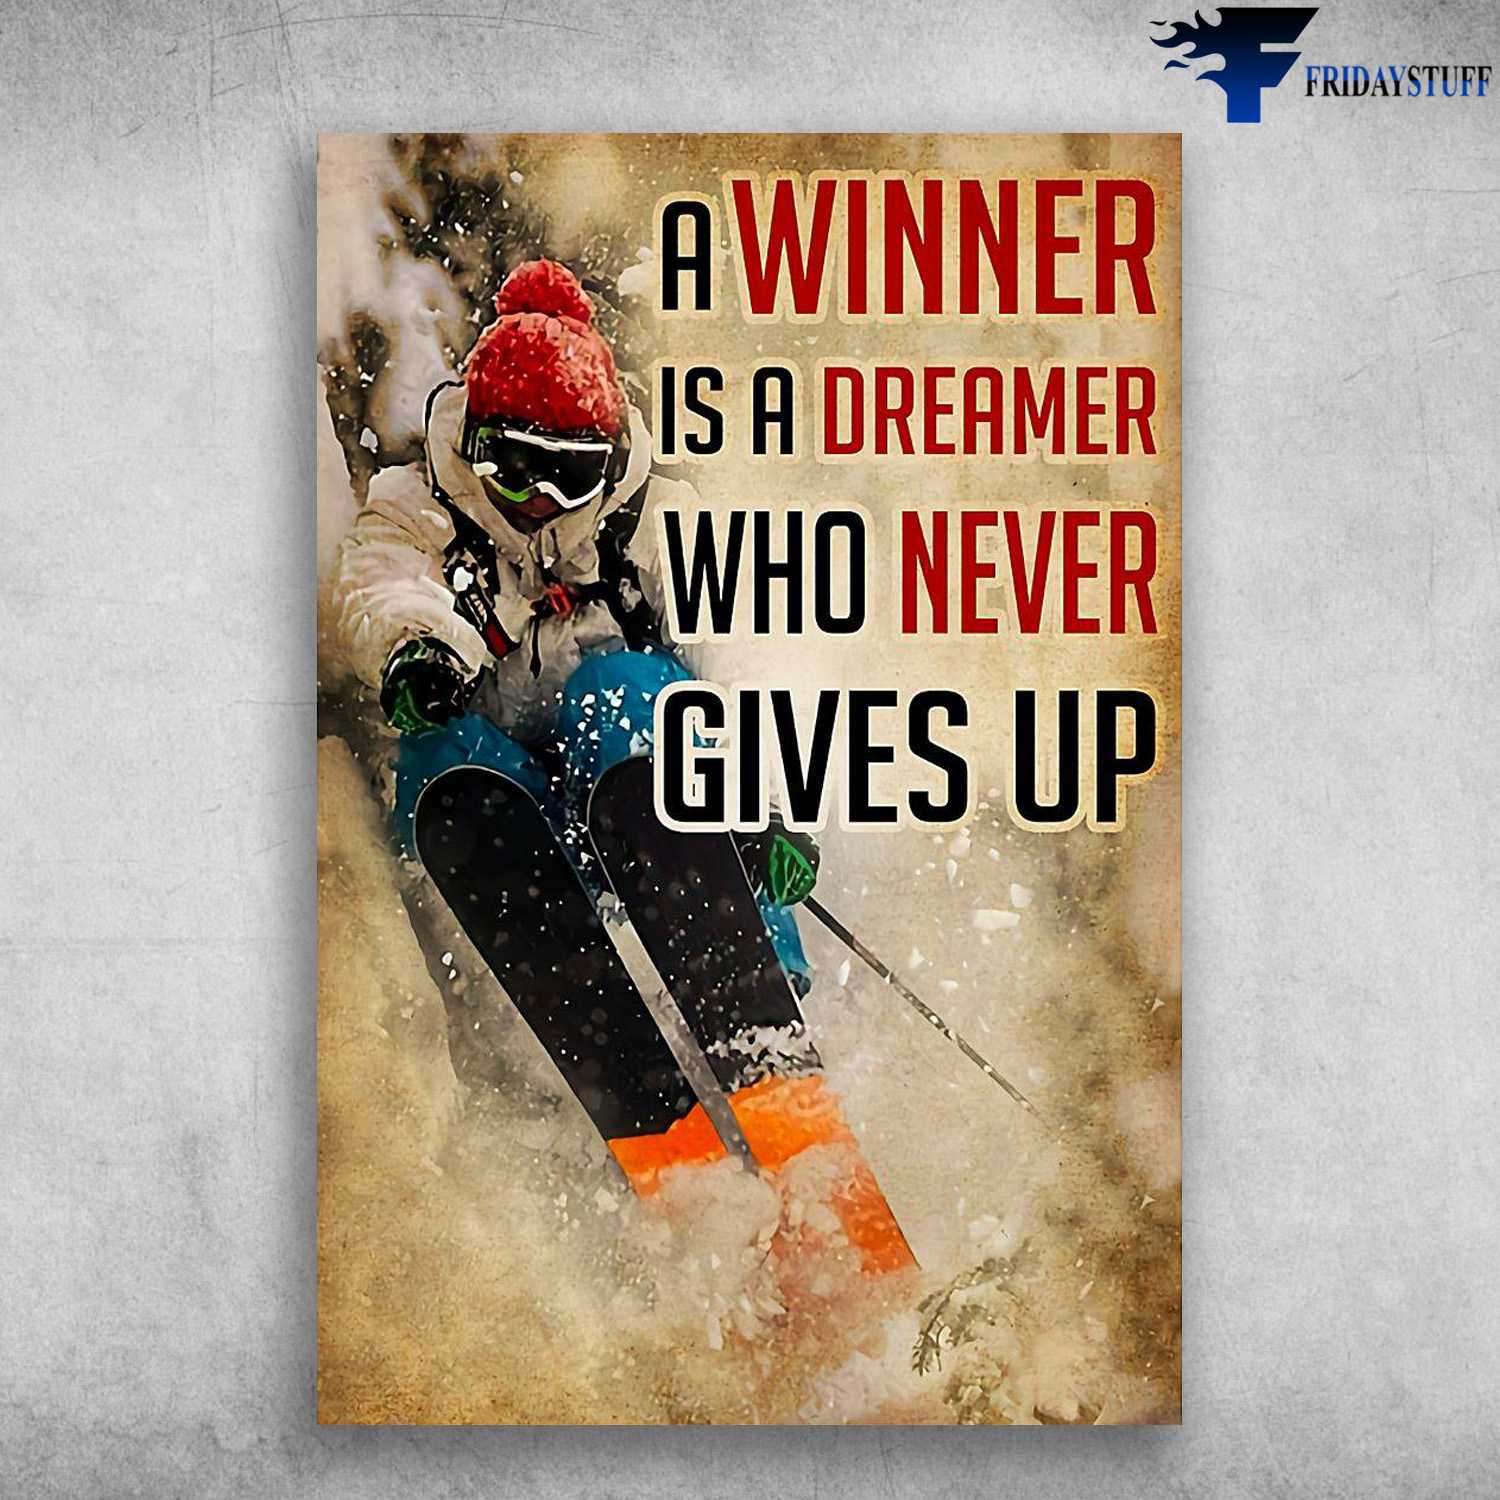 Skiing Poster, Skiing Decor, A Winner Is A Dreamer, Who Never Gives Up